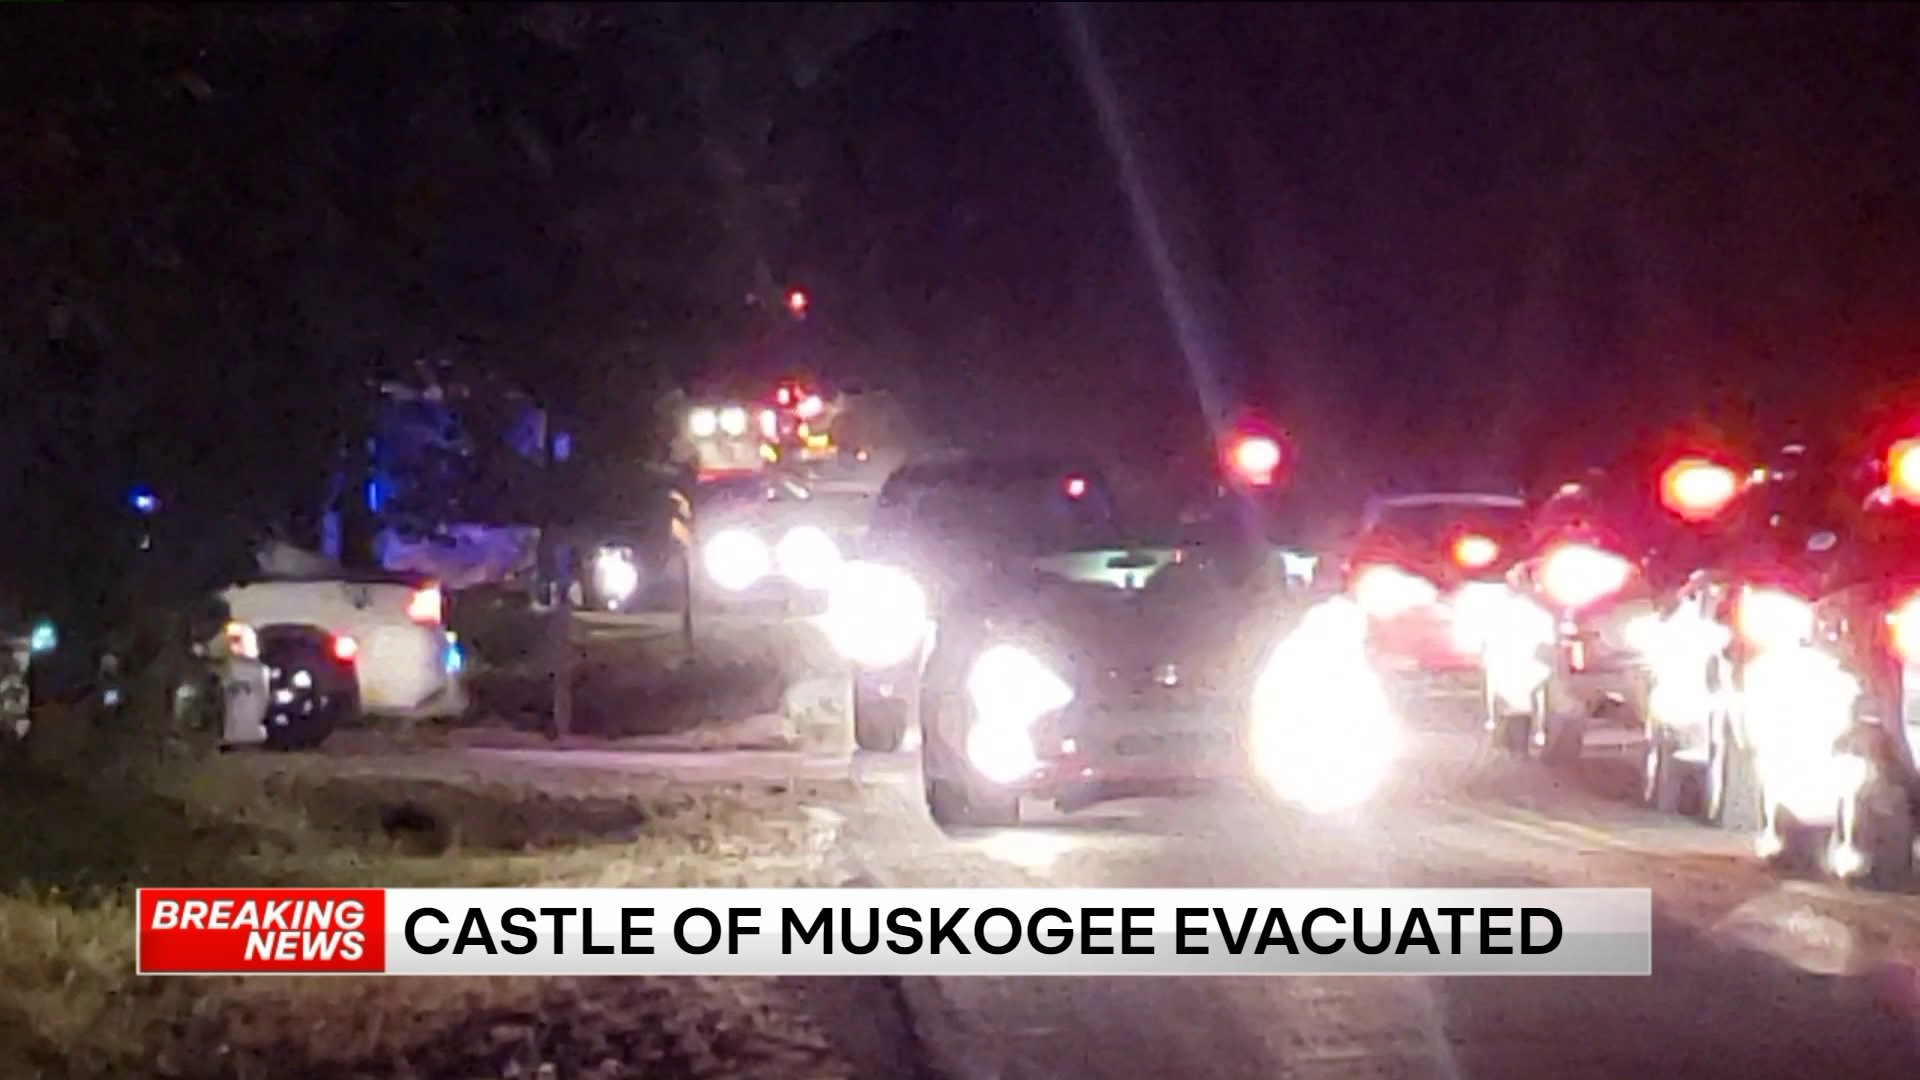 Crews Search For Missing Child At The Castle Of Muskogee